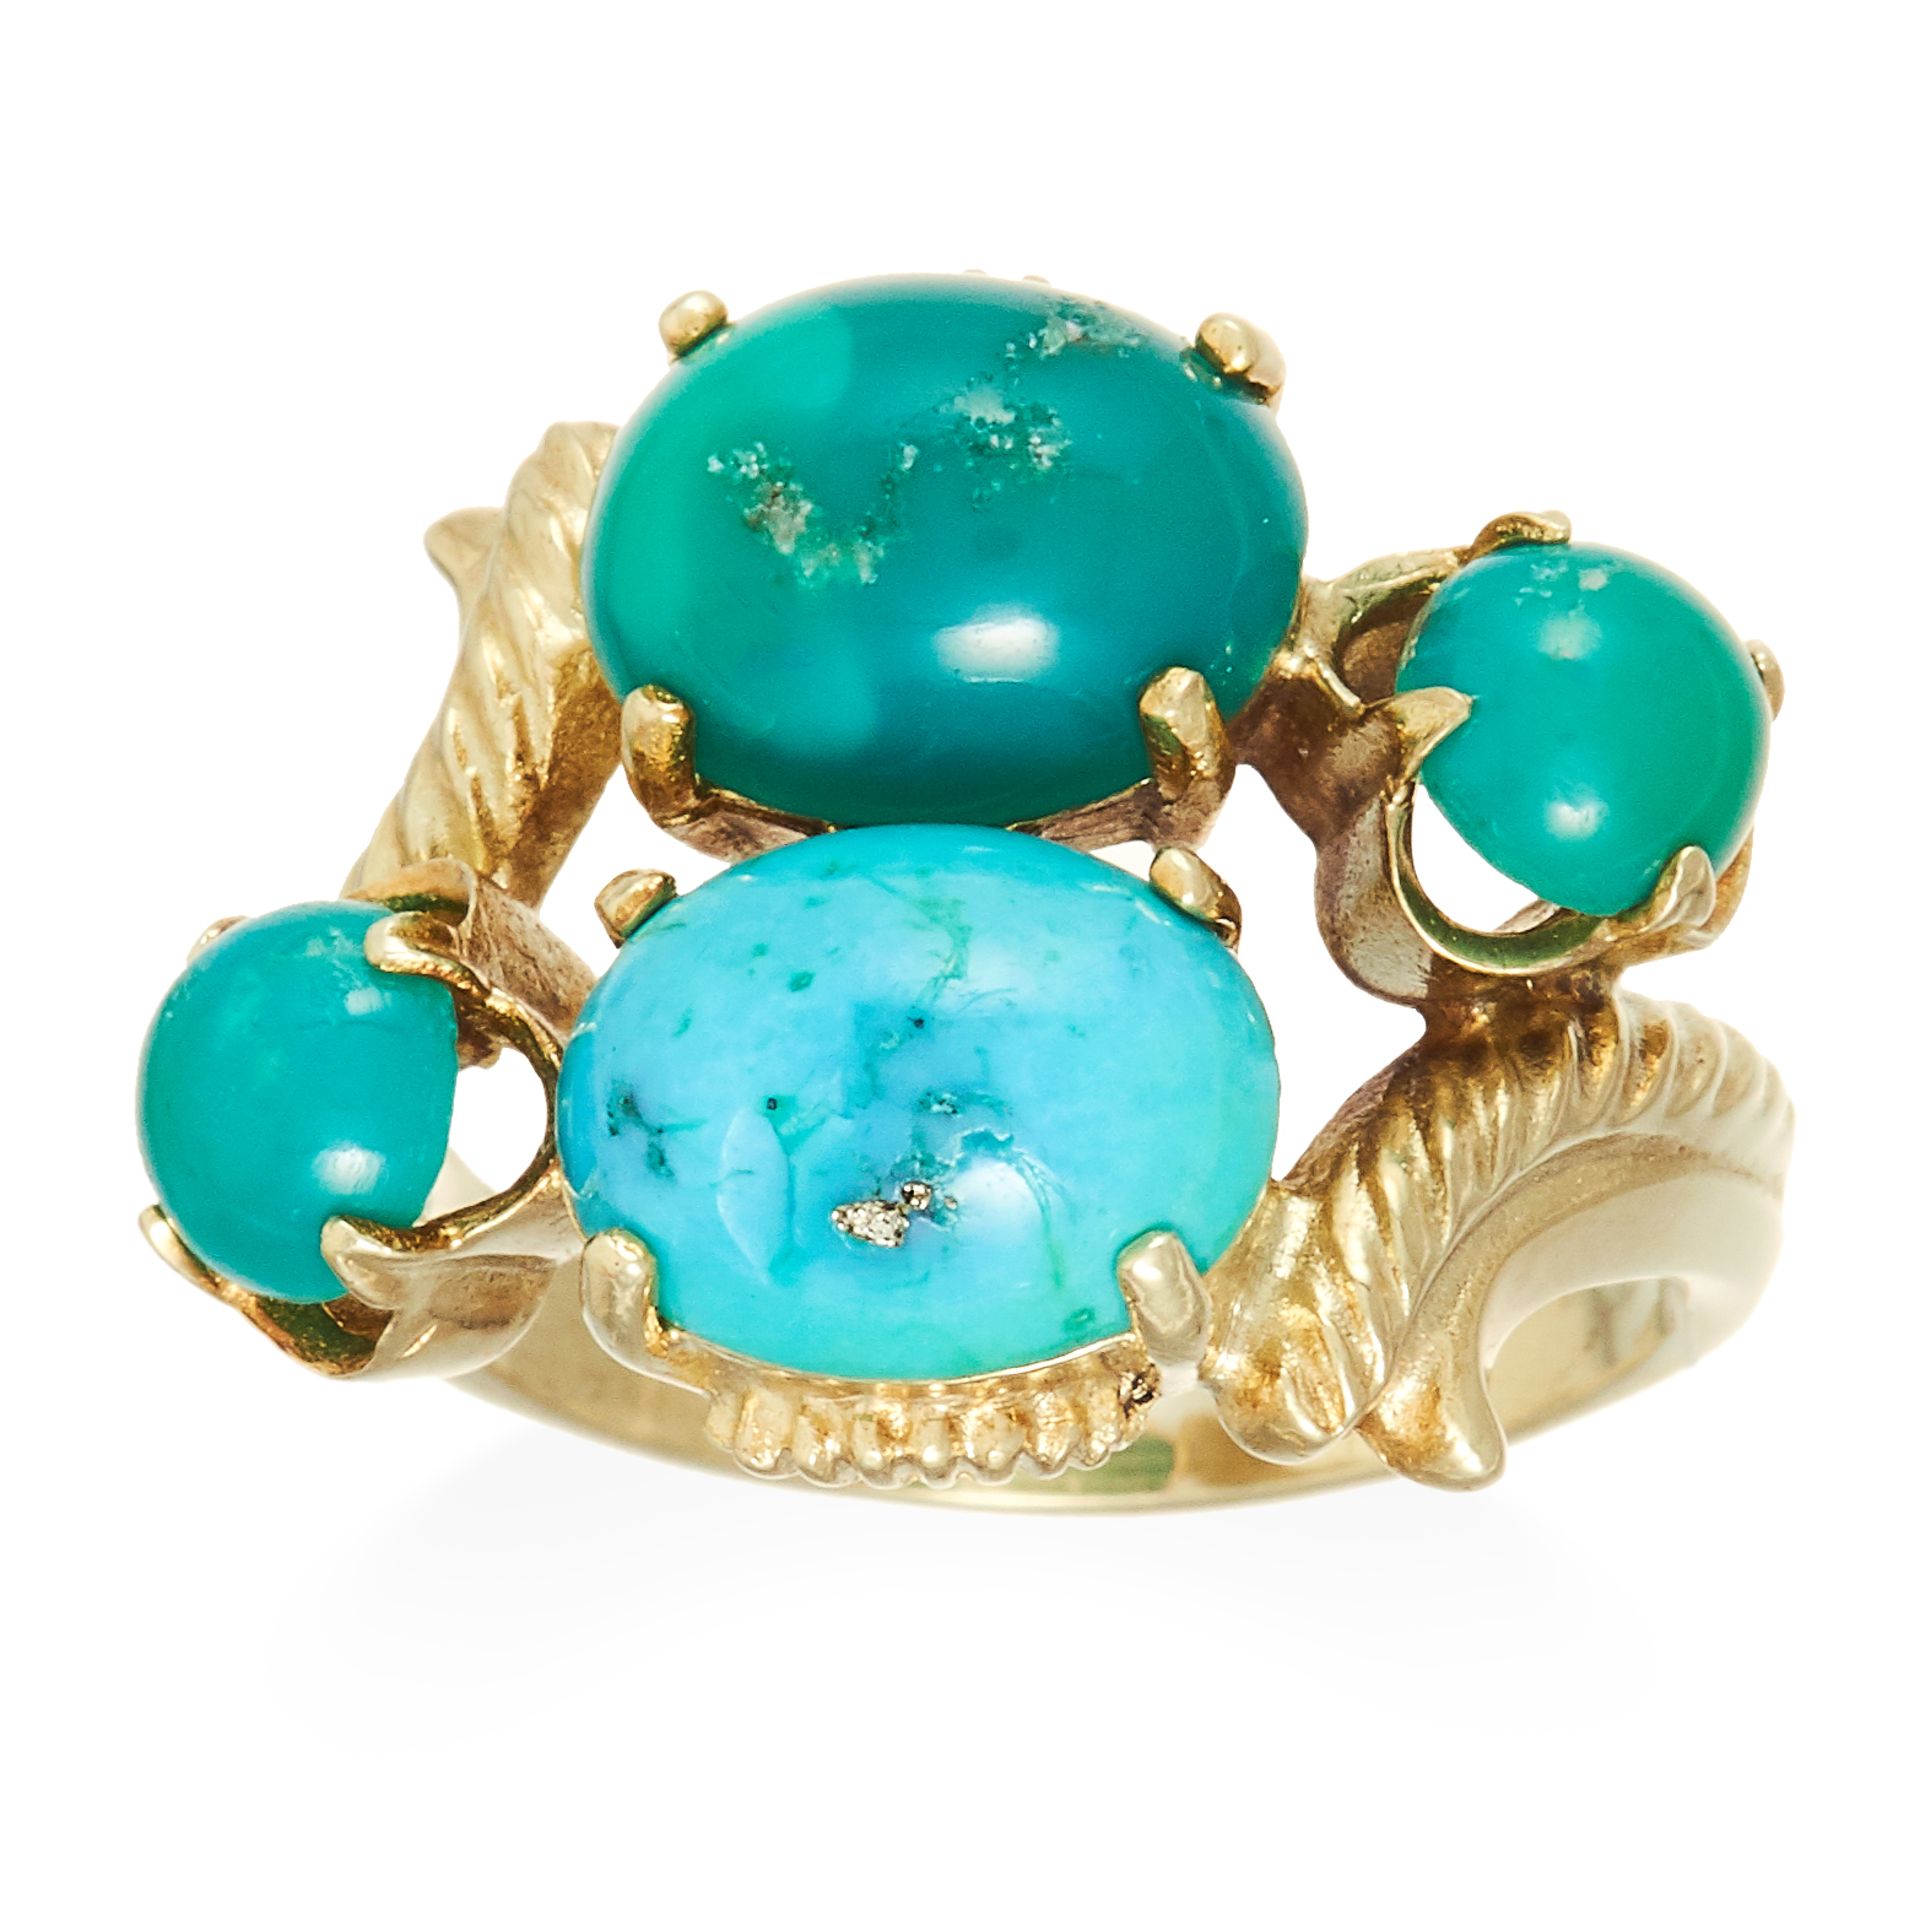 A TURQUOISE DRESS RING in high carat yellow gold, set with four turquoise cabochons between